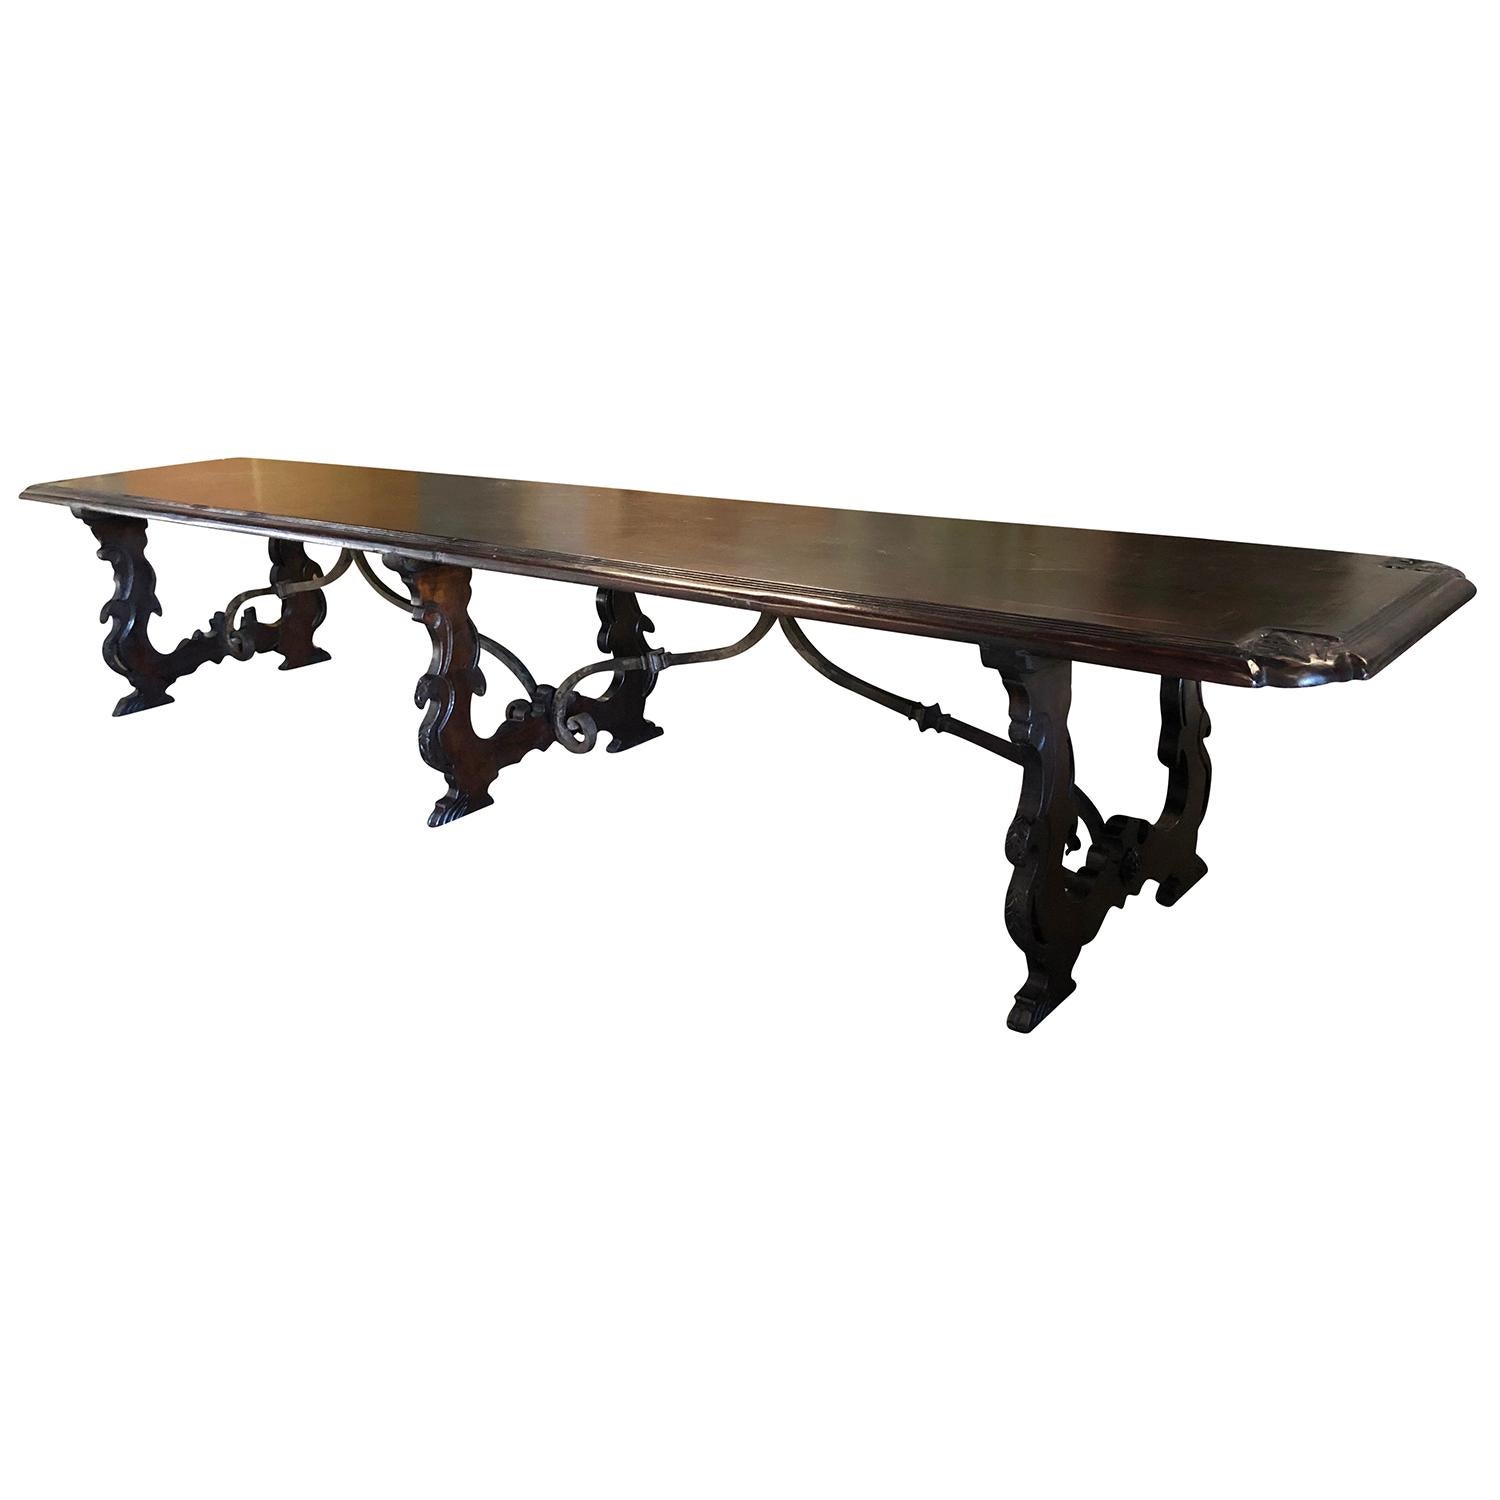 Hand-Carved 17th Century Italian Refectory Table - Antique Large Walnut Dining Table 